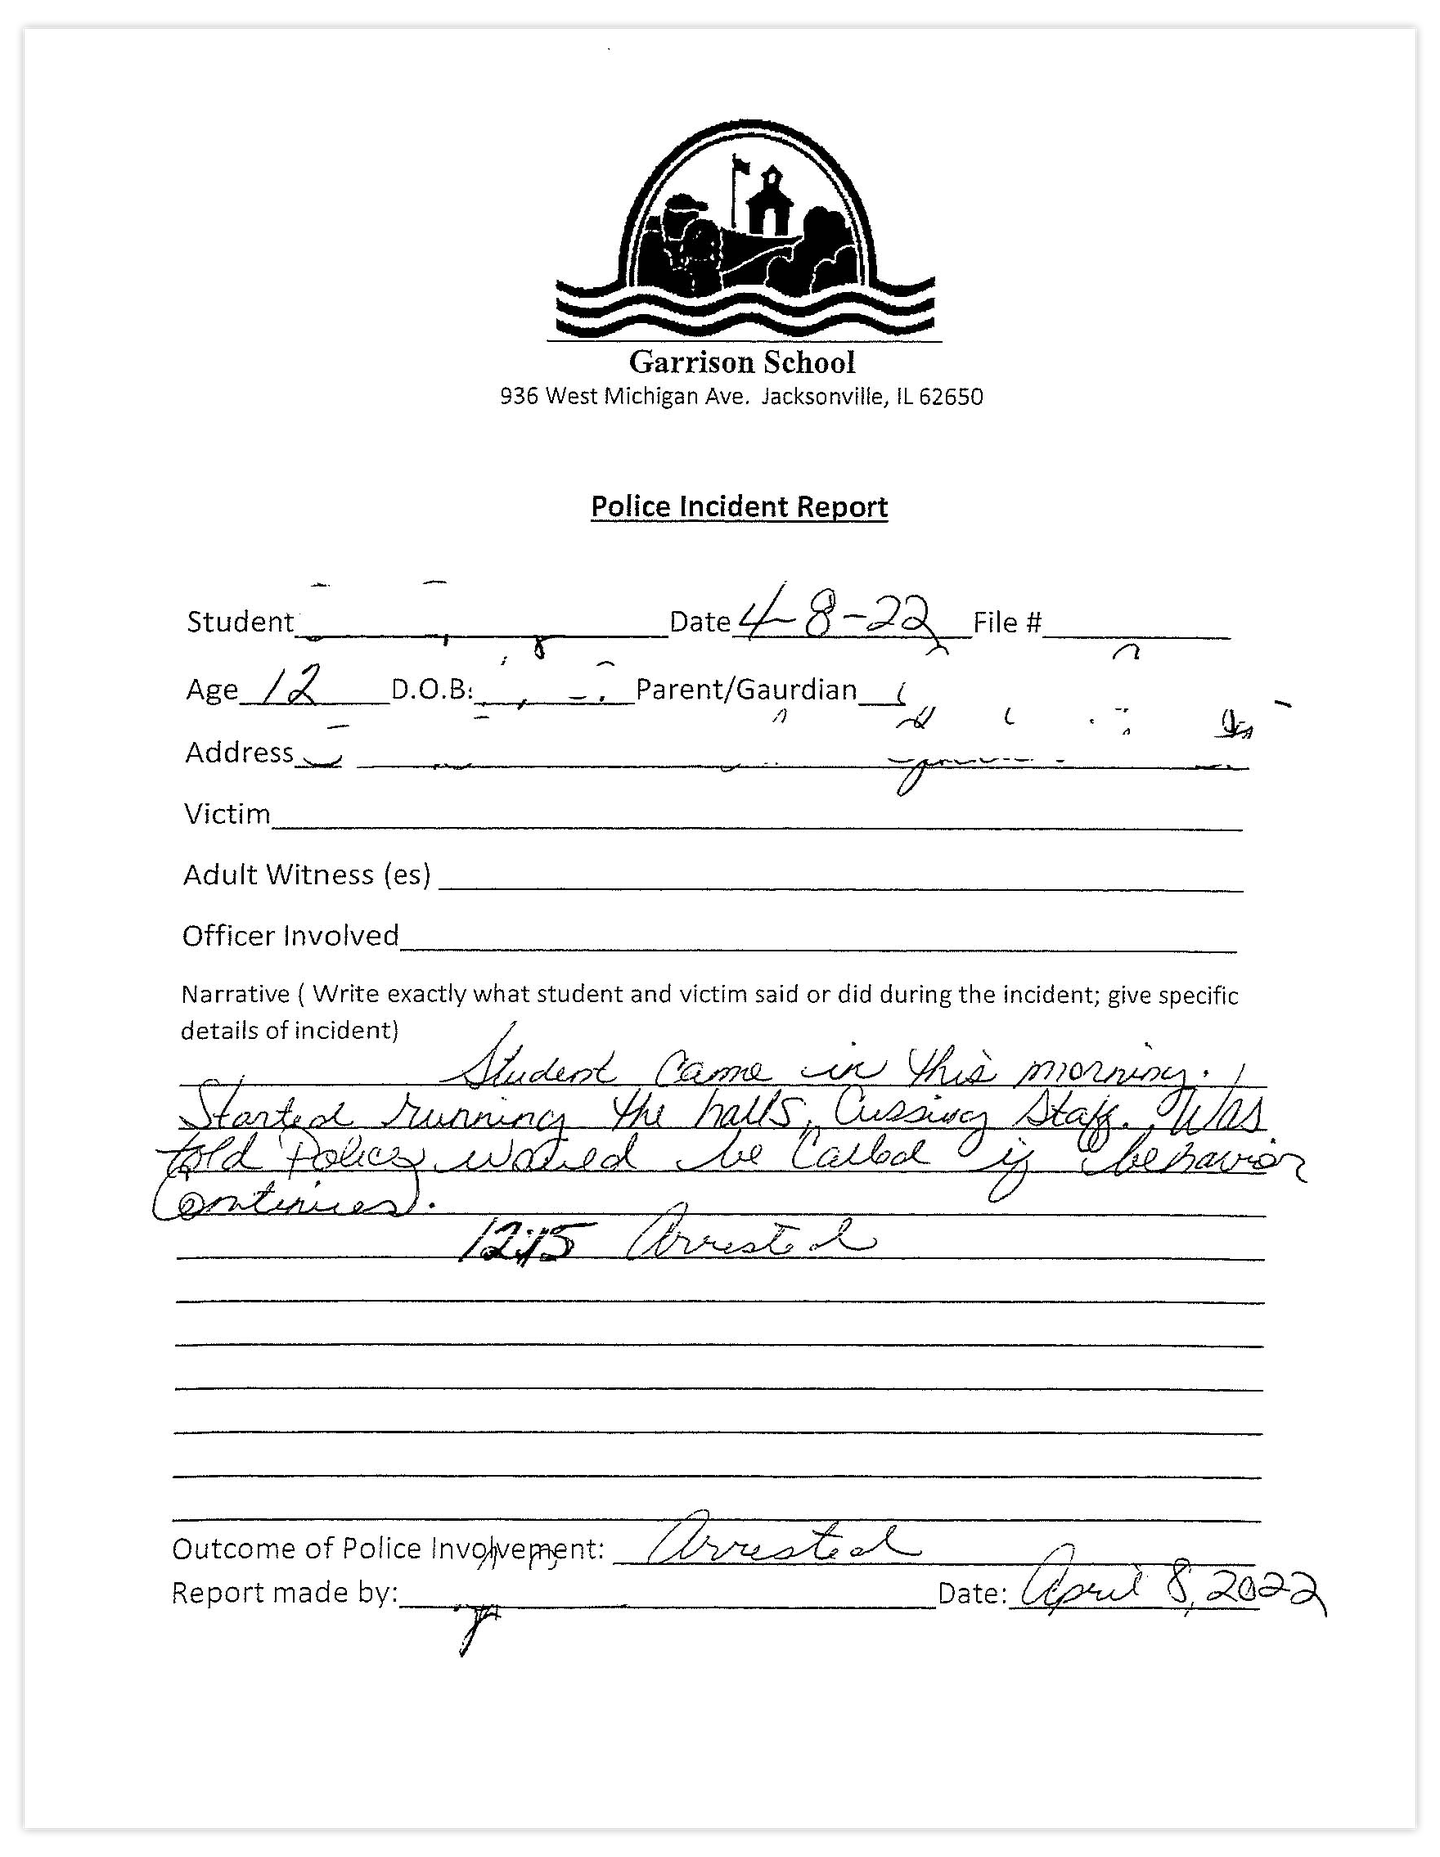 A “Police Incident Report” form used by the Garrison School details a student’s behavior and arrest. 